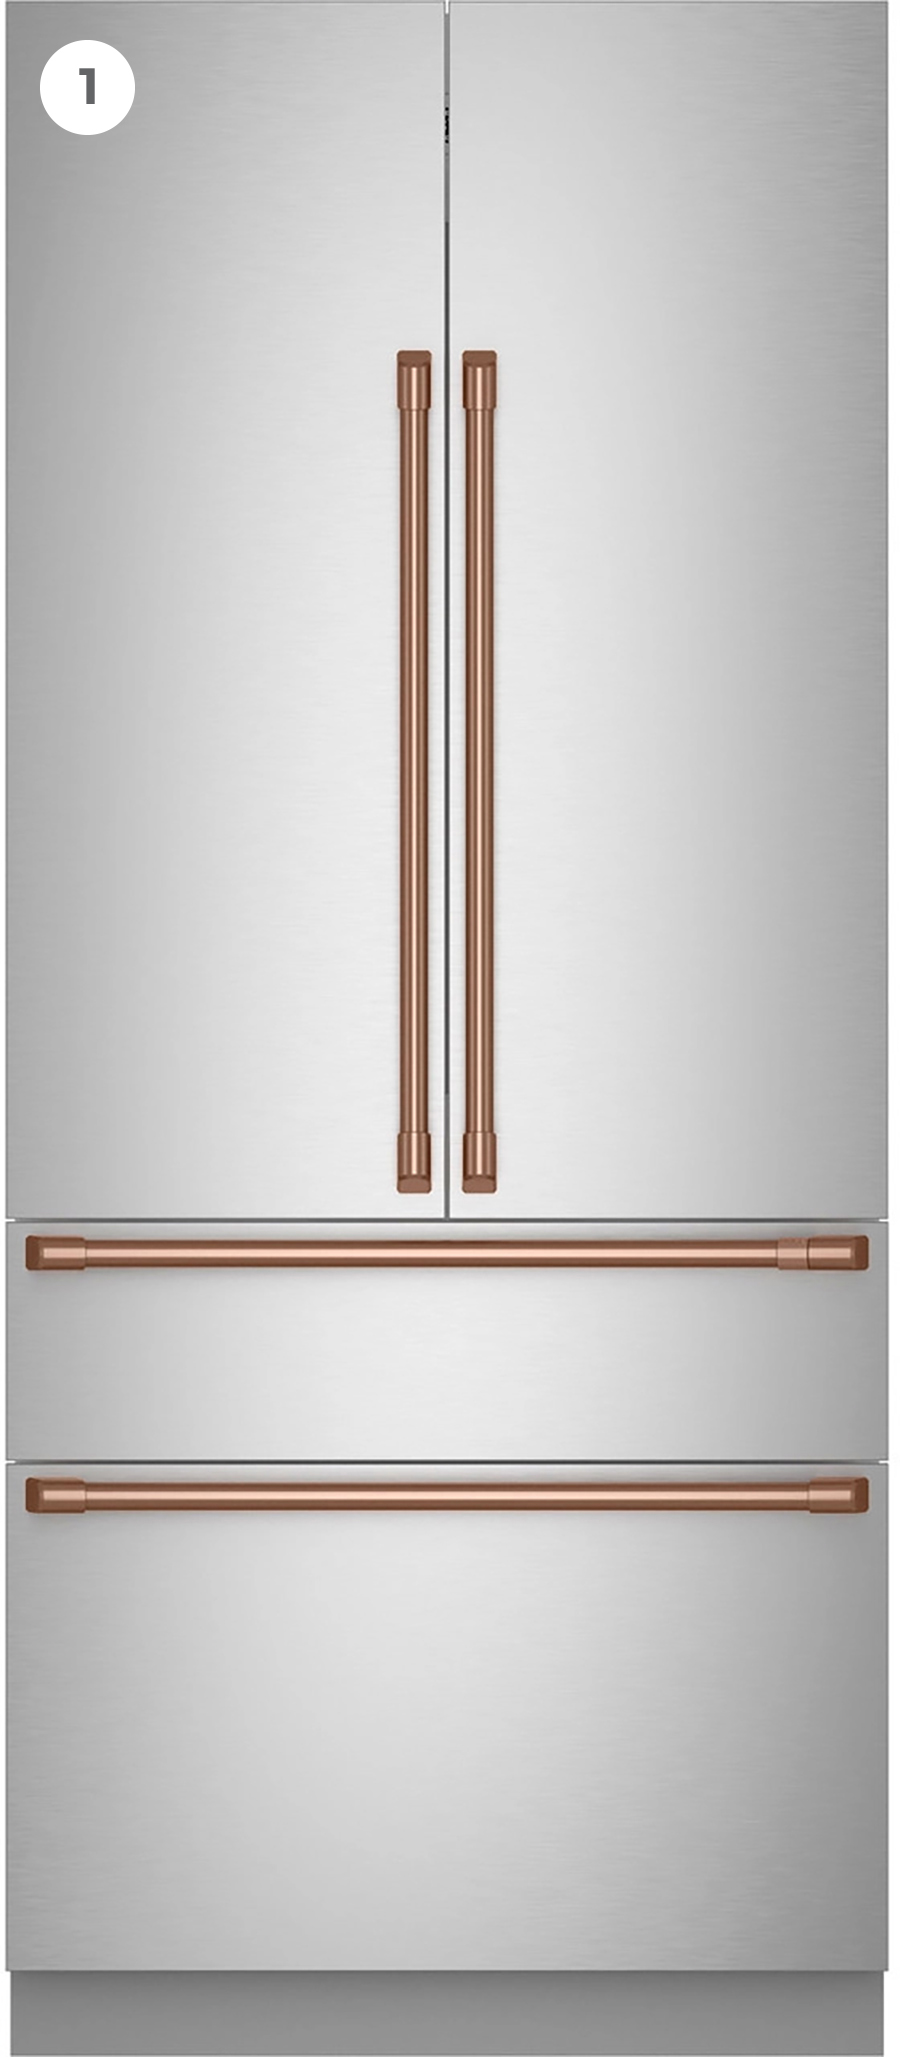 fridge with a temperature-controlled drawer